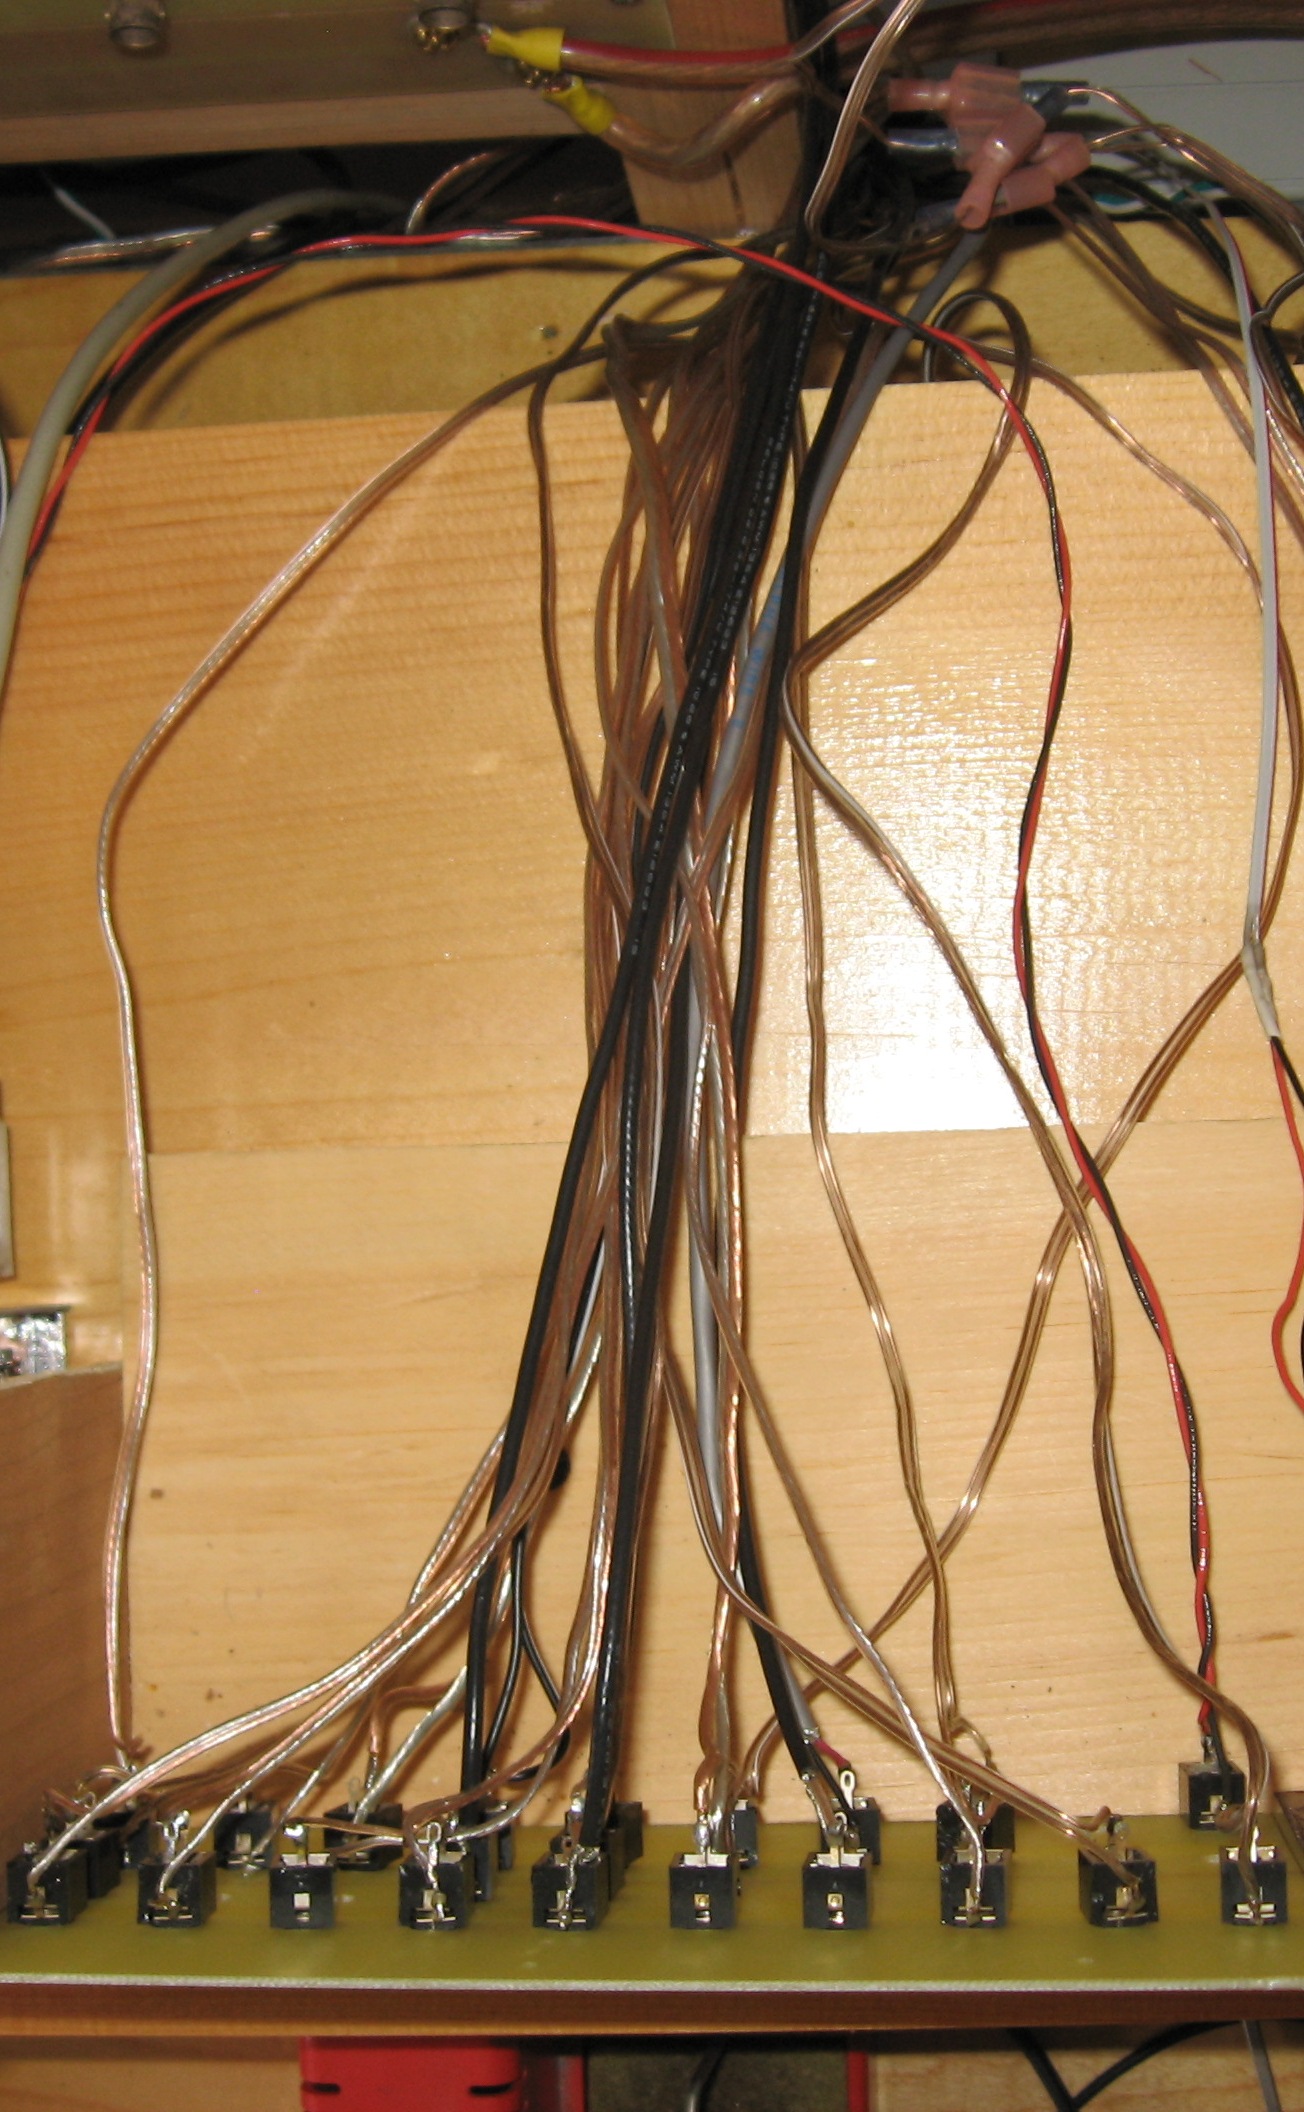 Internal View of the Audio and Keying Patch panels for the Amateur Radio Operating Console.